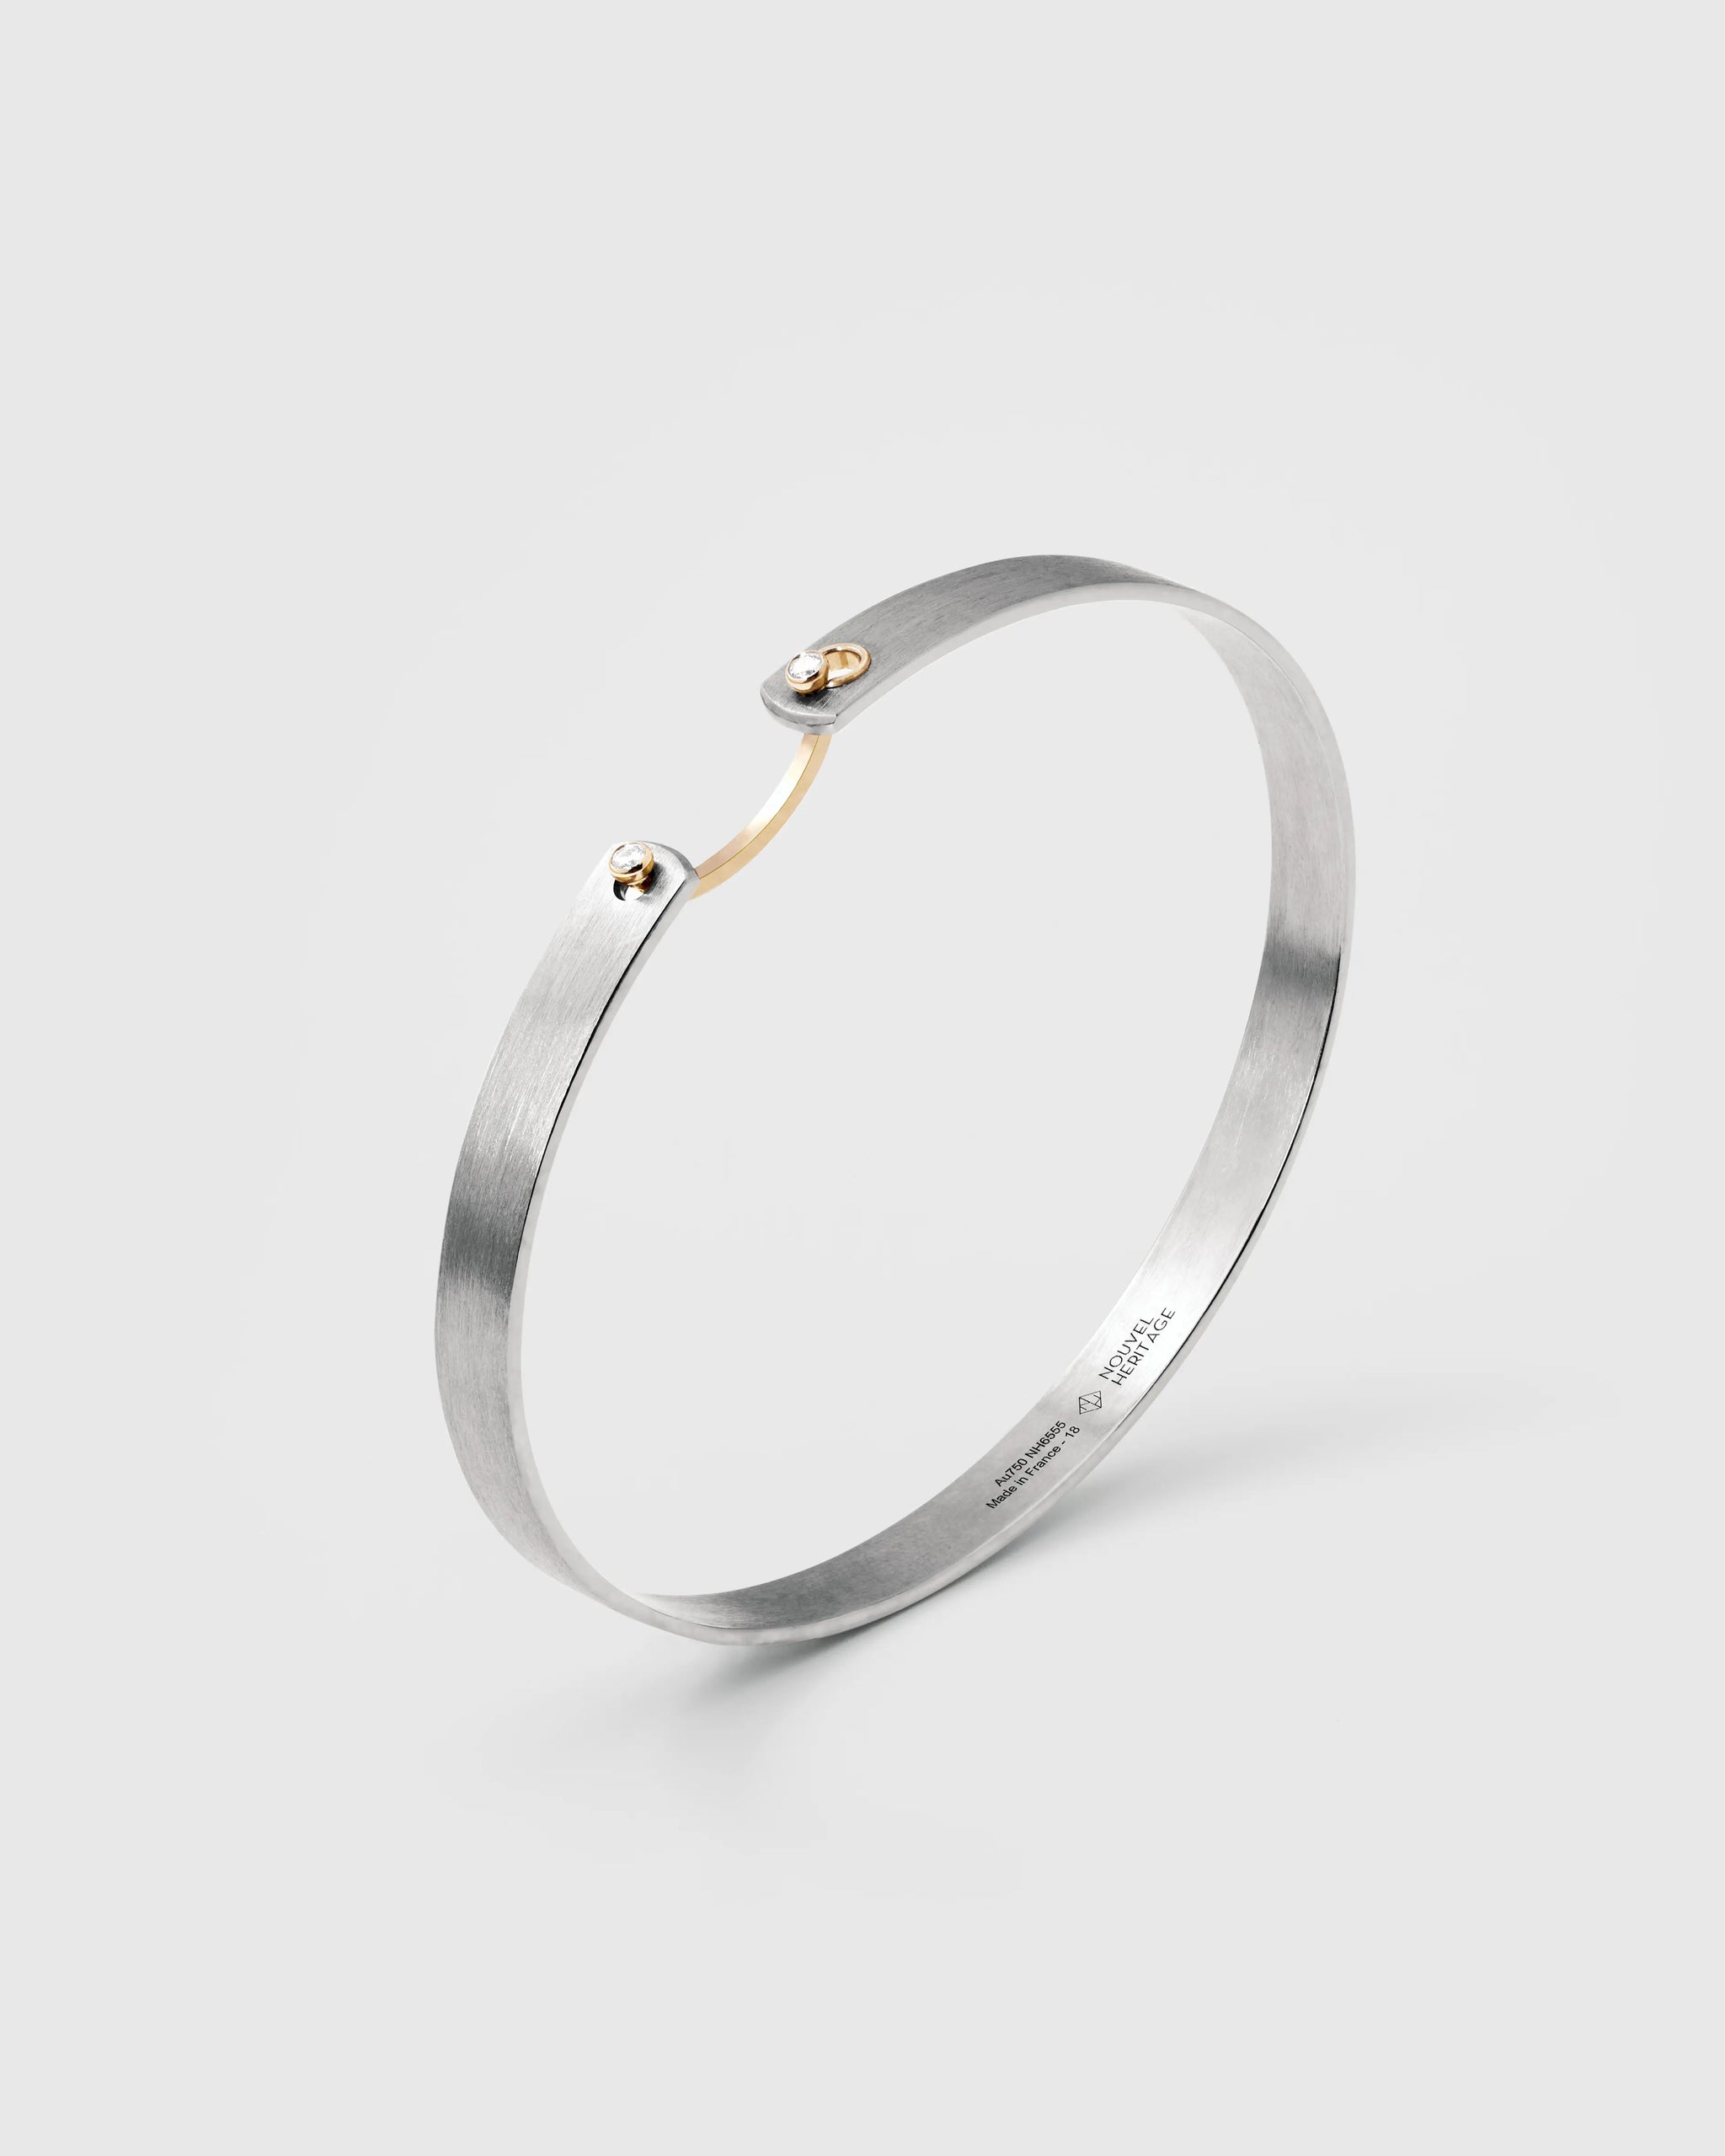 Titanium GM  Mood Bangle in Yellow Gold - 1 - Nouvel Heritage